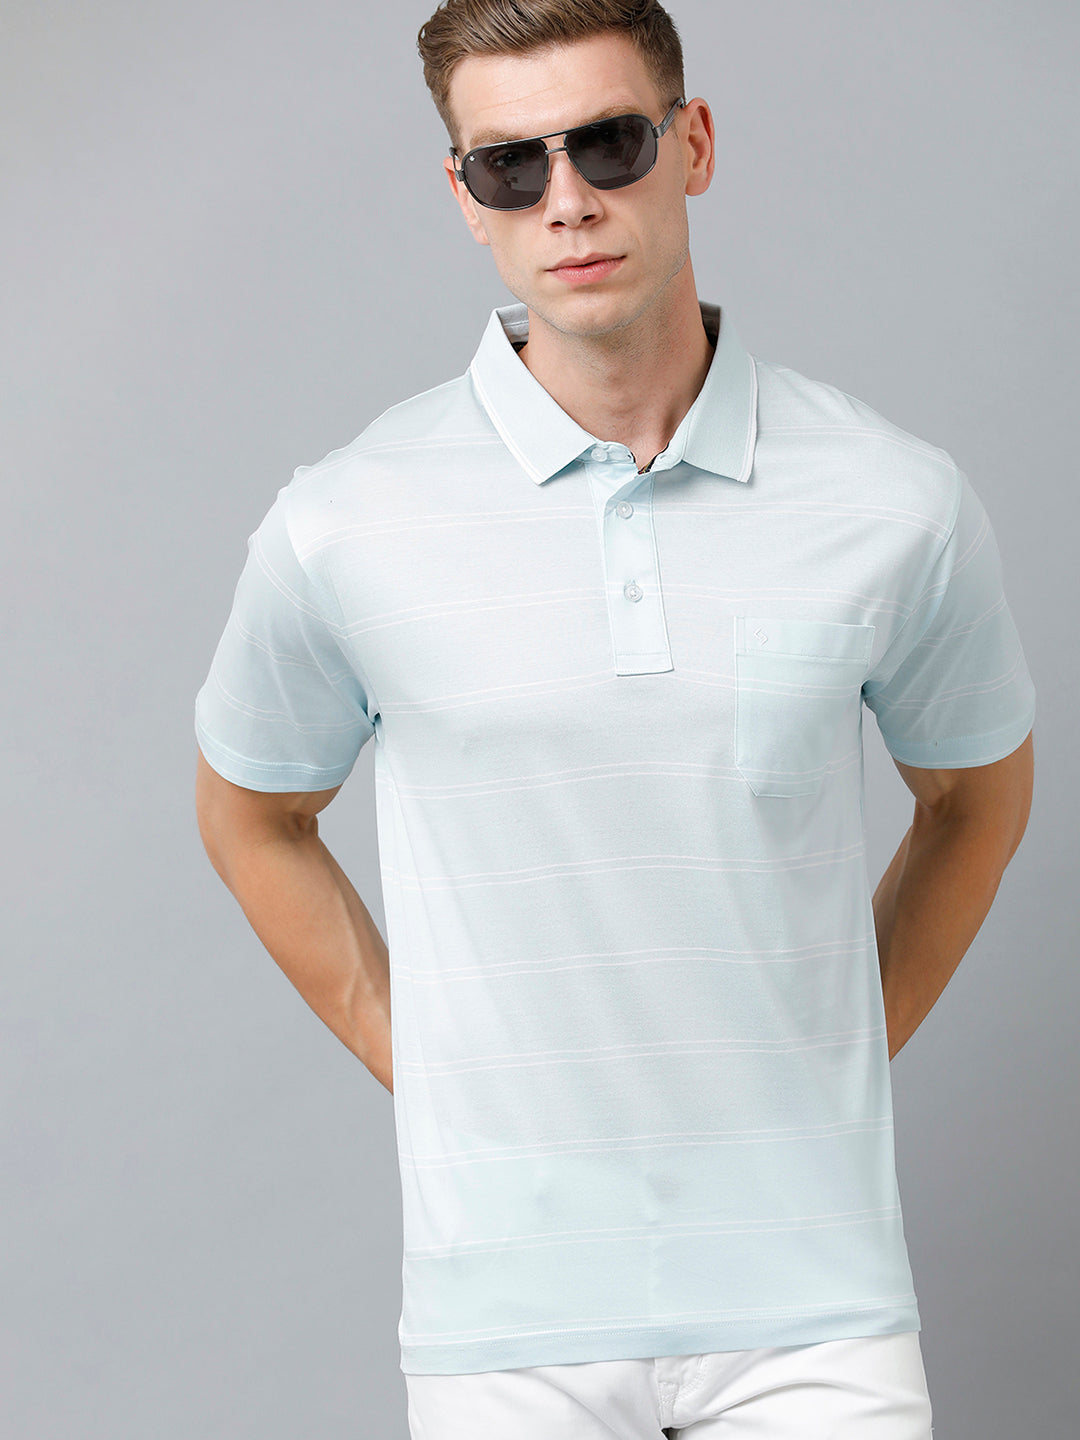 Classic Polo Men's Cotton Half Sleeve Striped Authentic Fit Polo Neck Sky Blue Color T-Shirt | Ultimo - 303 B